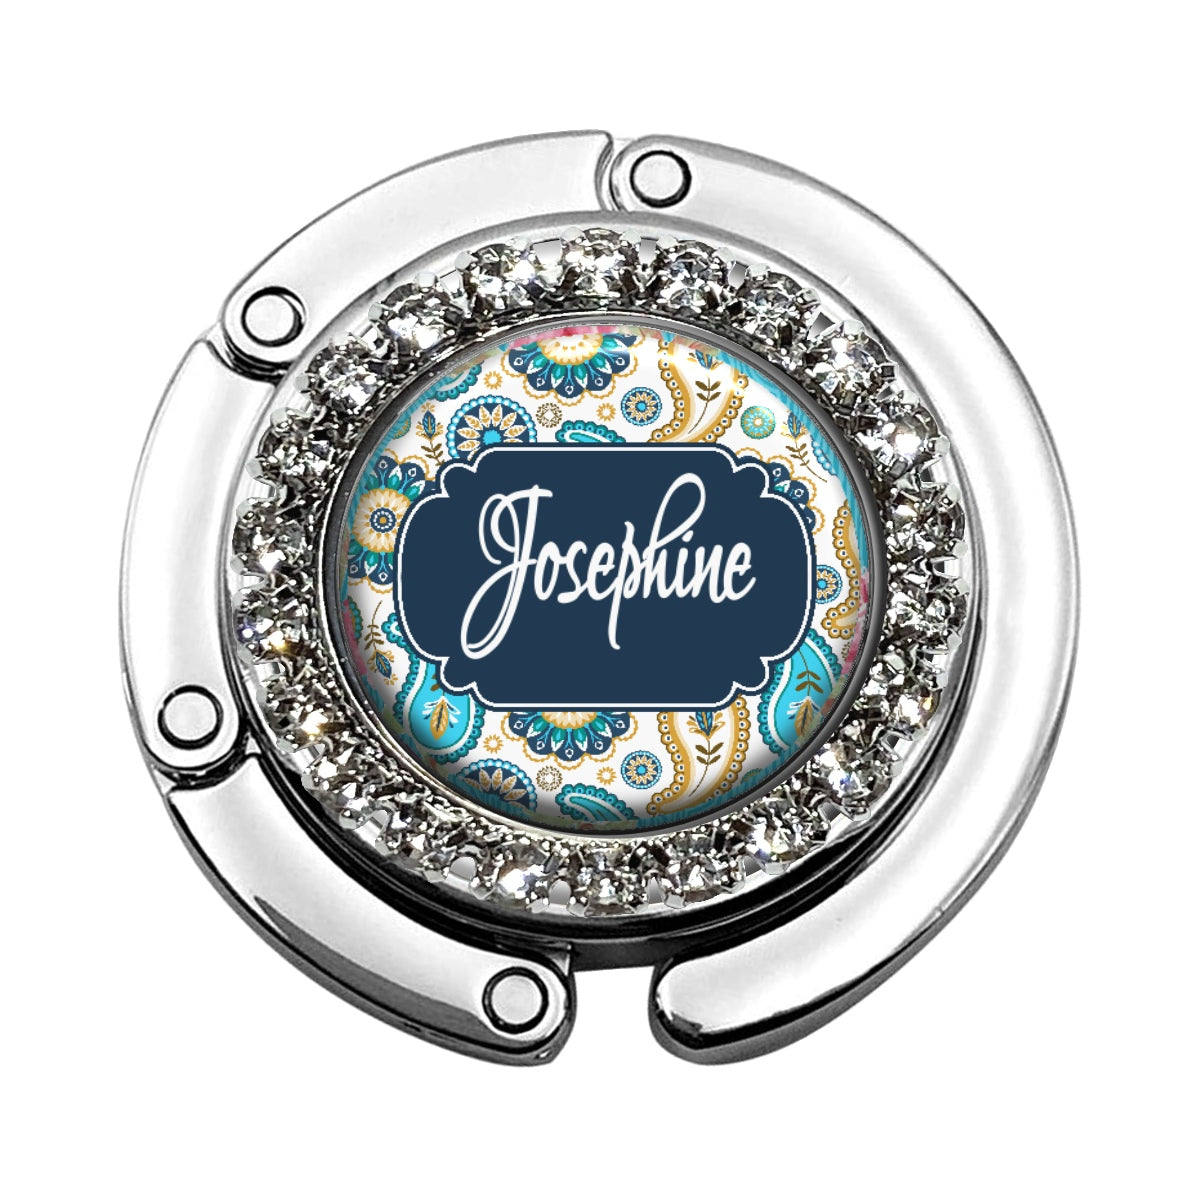 a personalized glass ashtray with an ornate design